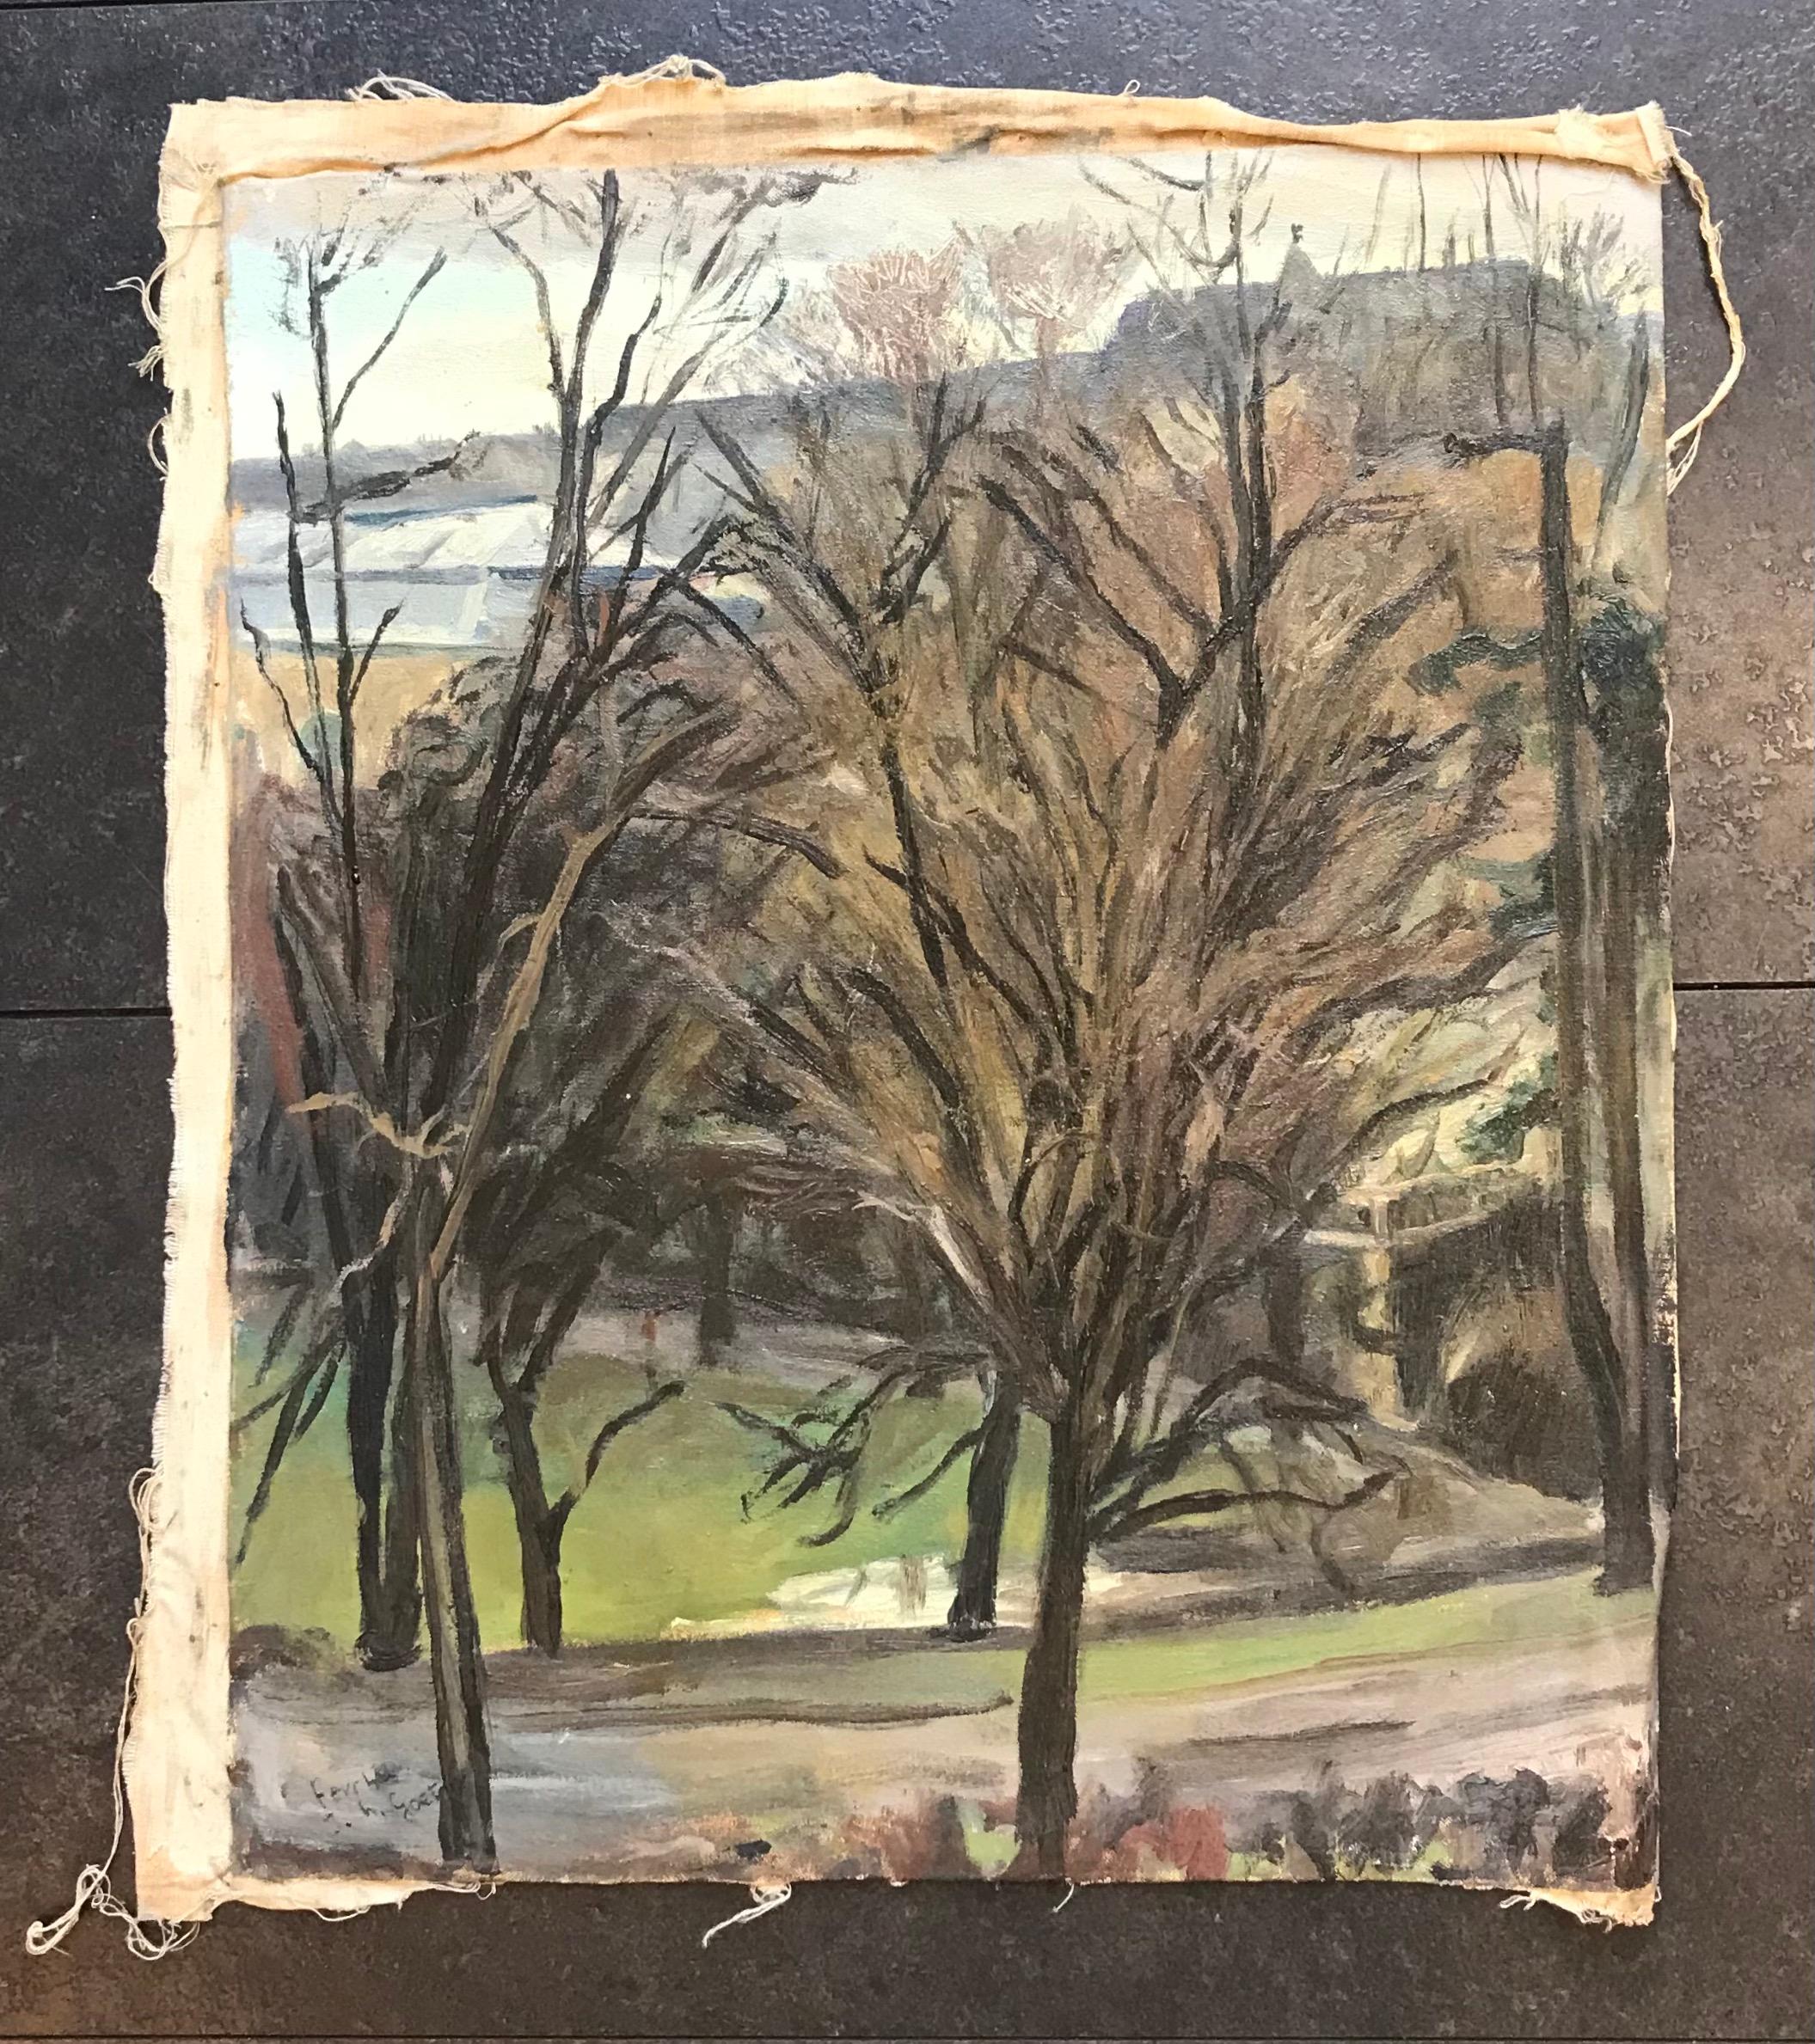 Bare trees by Isaac Ch. Goetz - Oil on canvas 45x54 cm - Painting by Isaac Charles Goetz